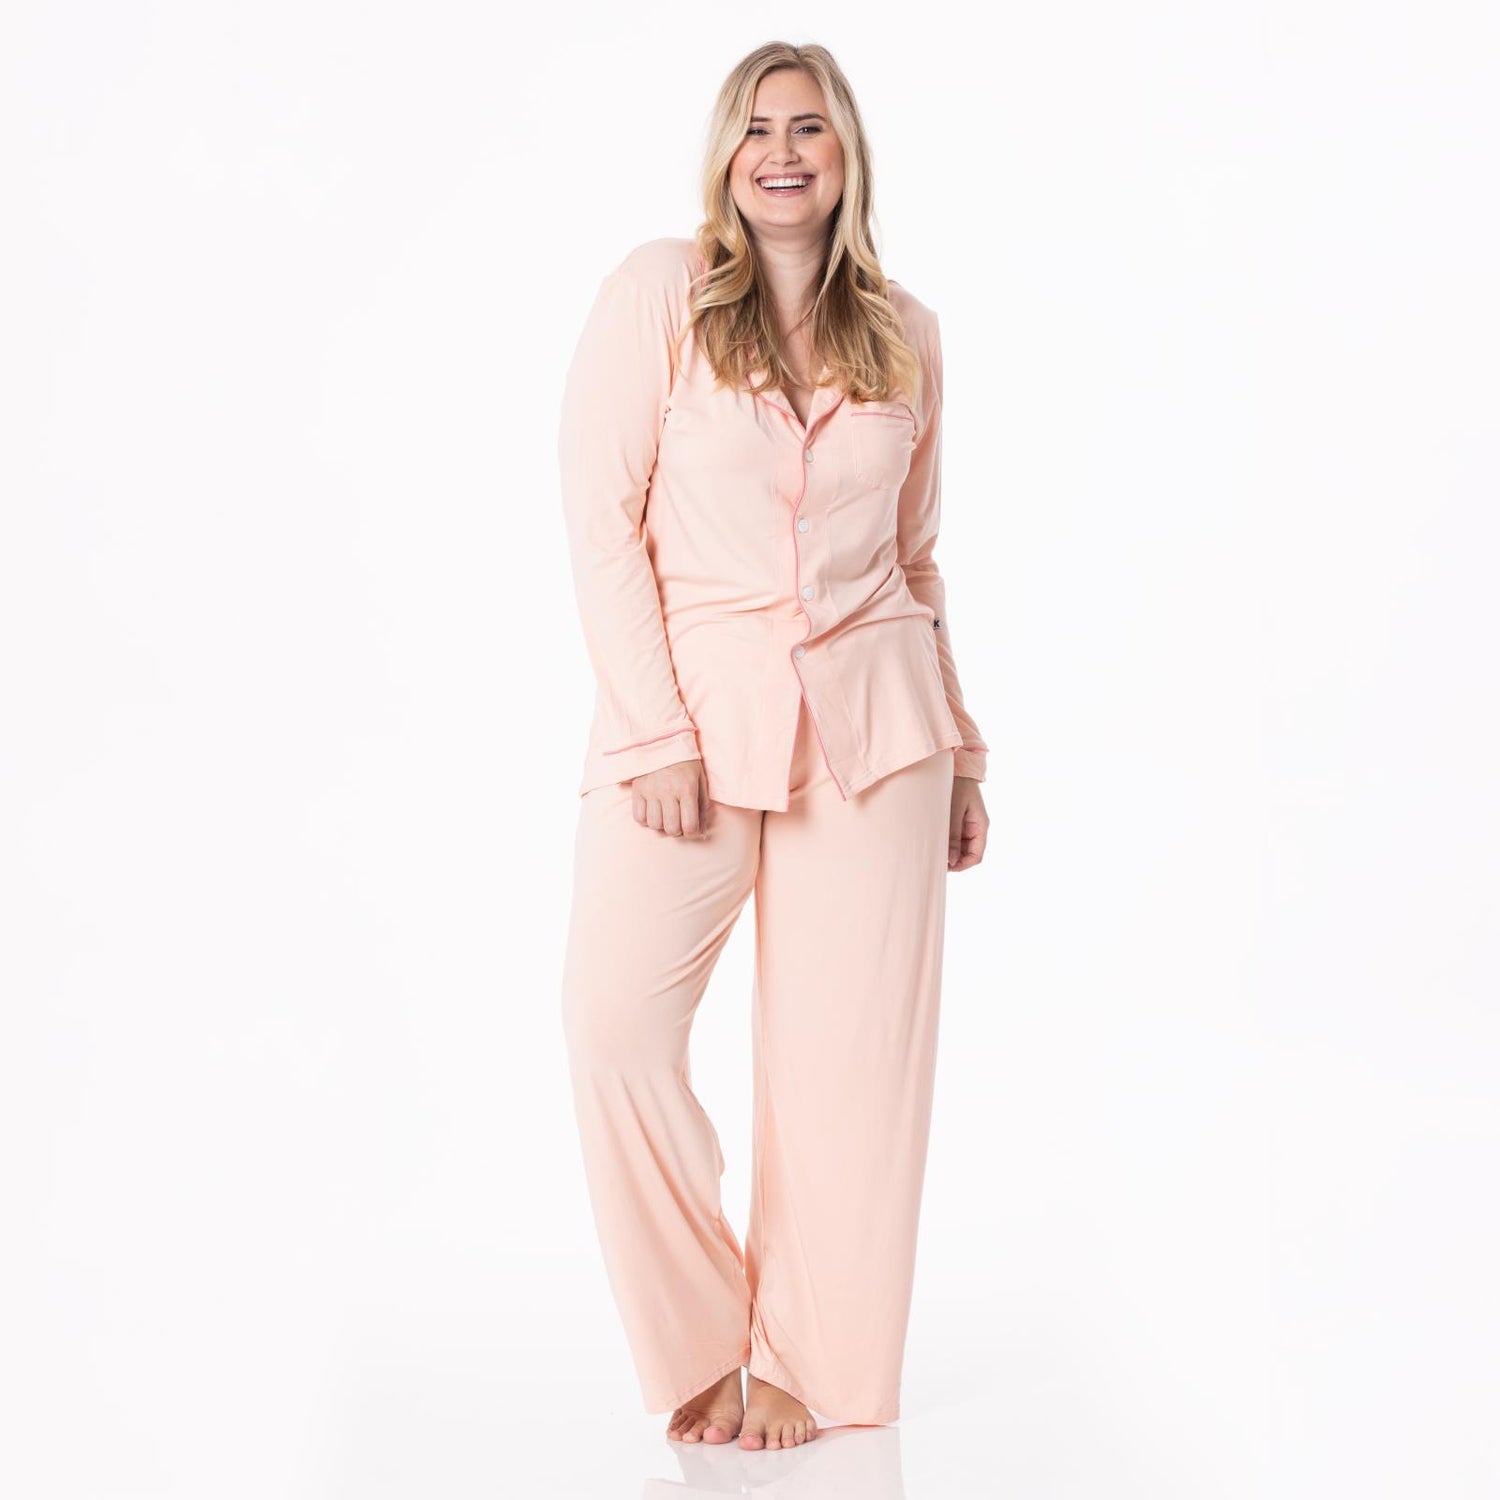 Women's Long Sleeved Collared Pajama Set in Peach Blossom with Desert Rose